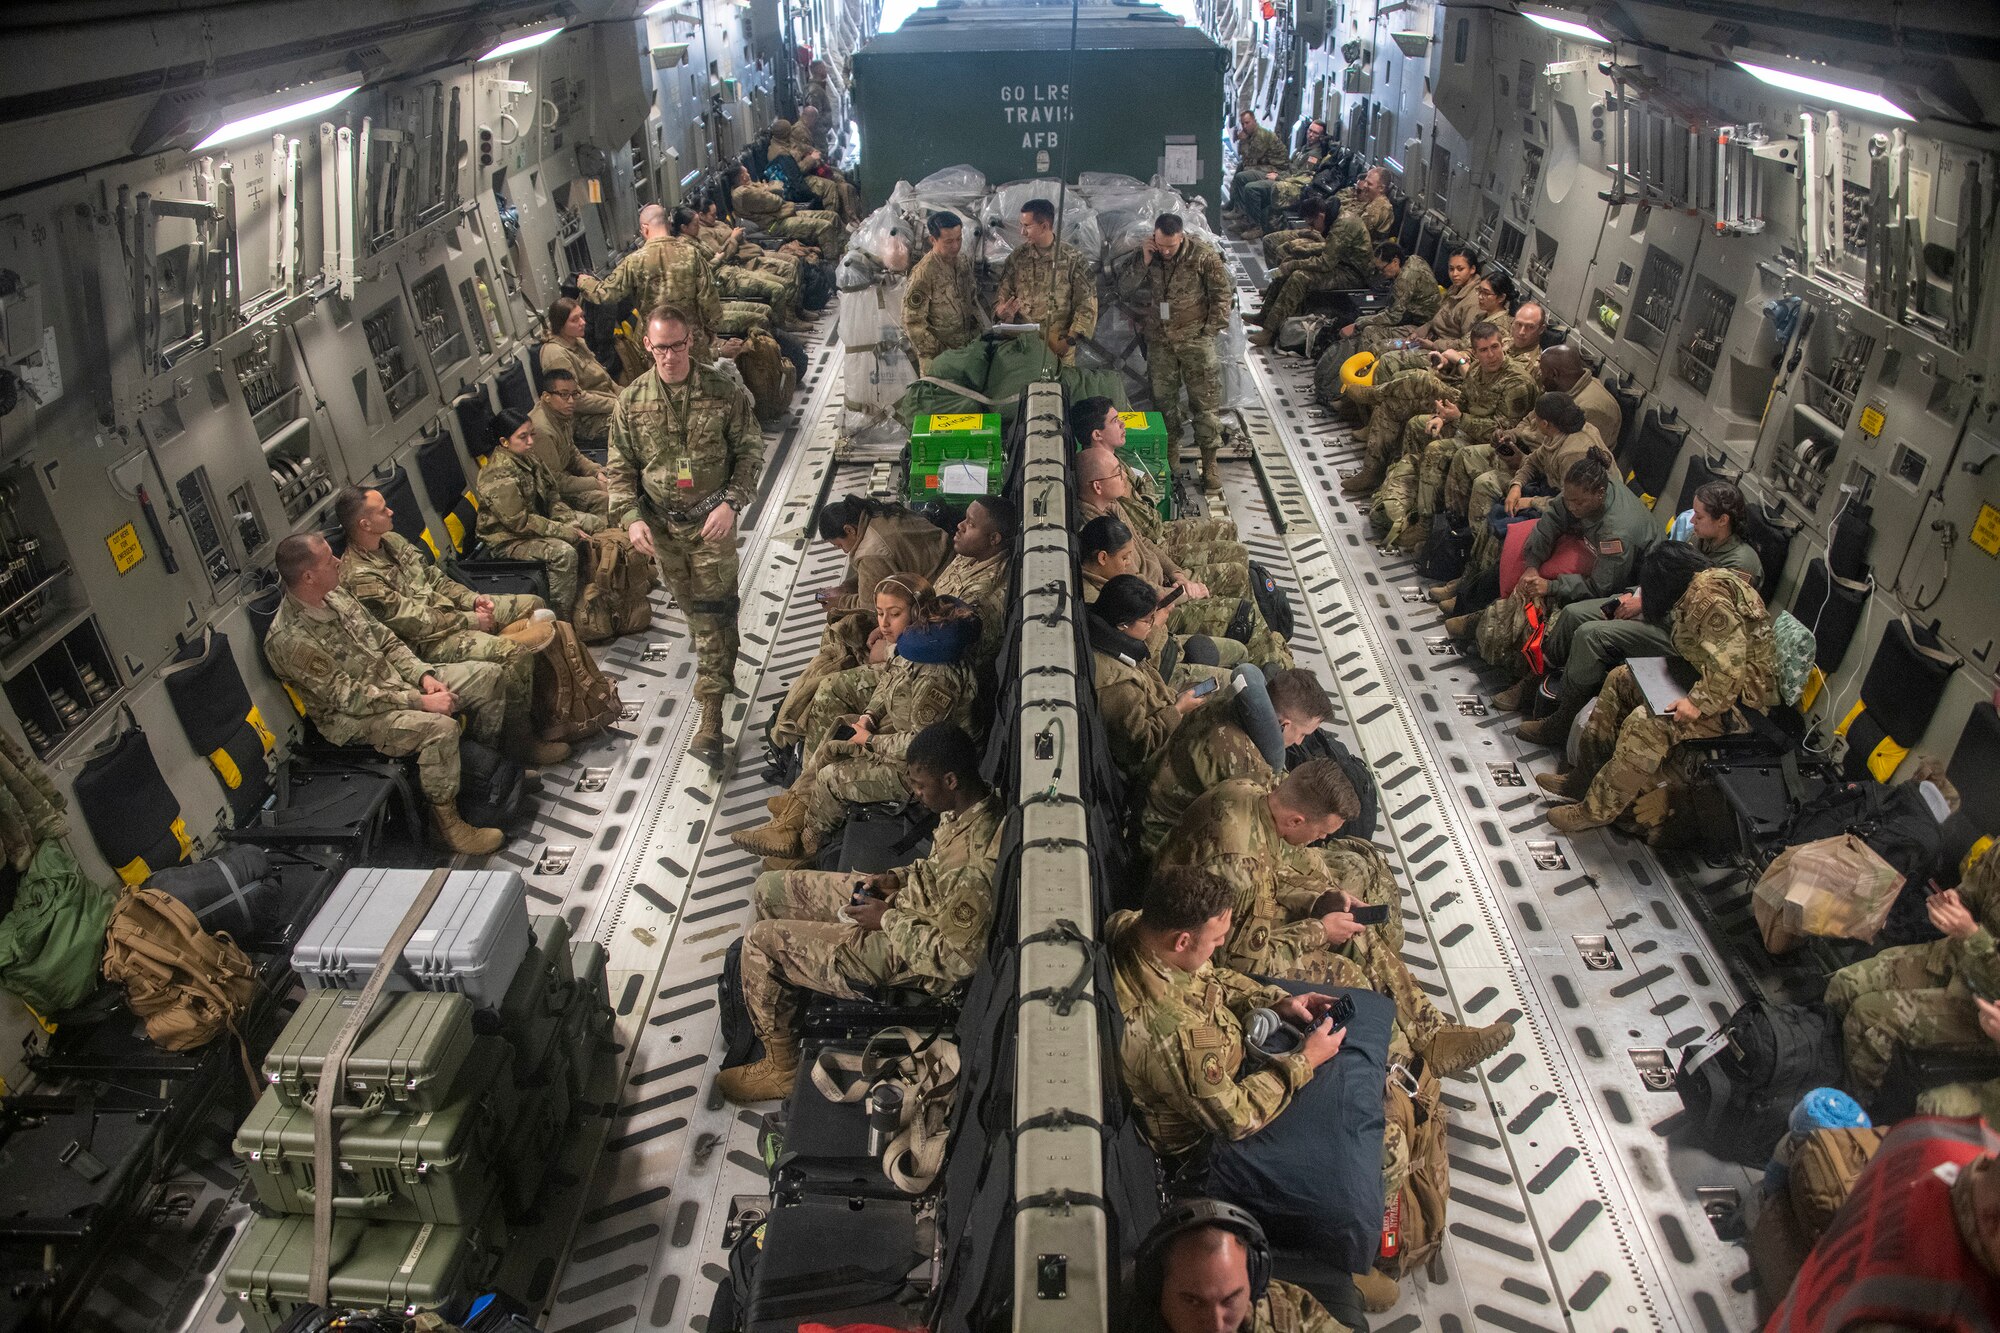 a large group of airmen sit in the cargo hold of an airplane